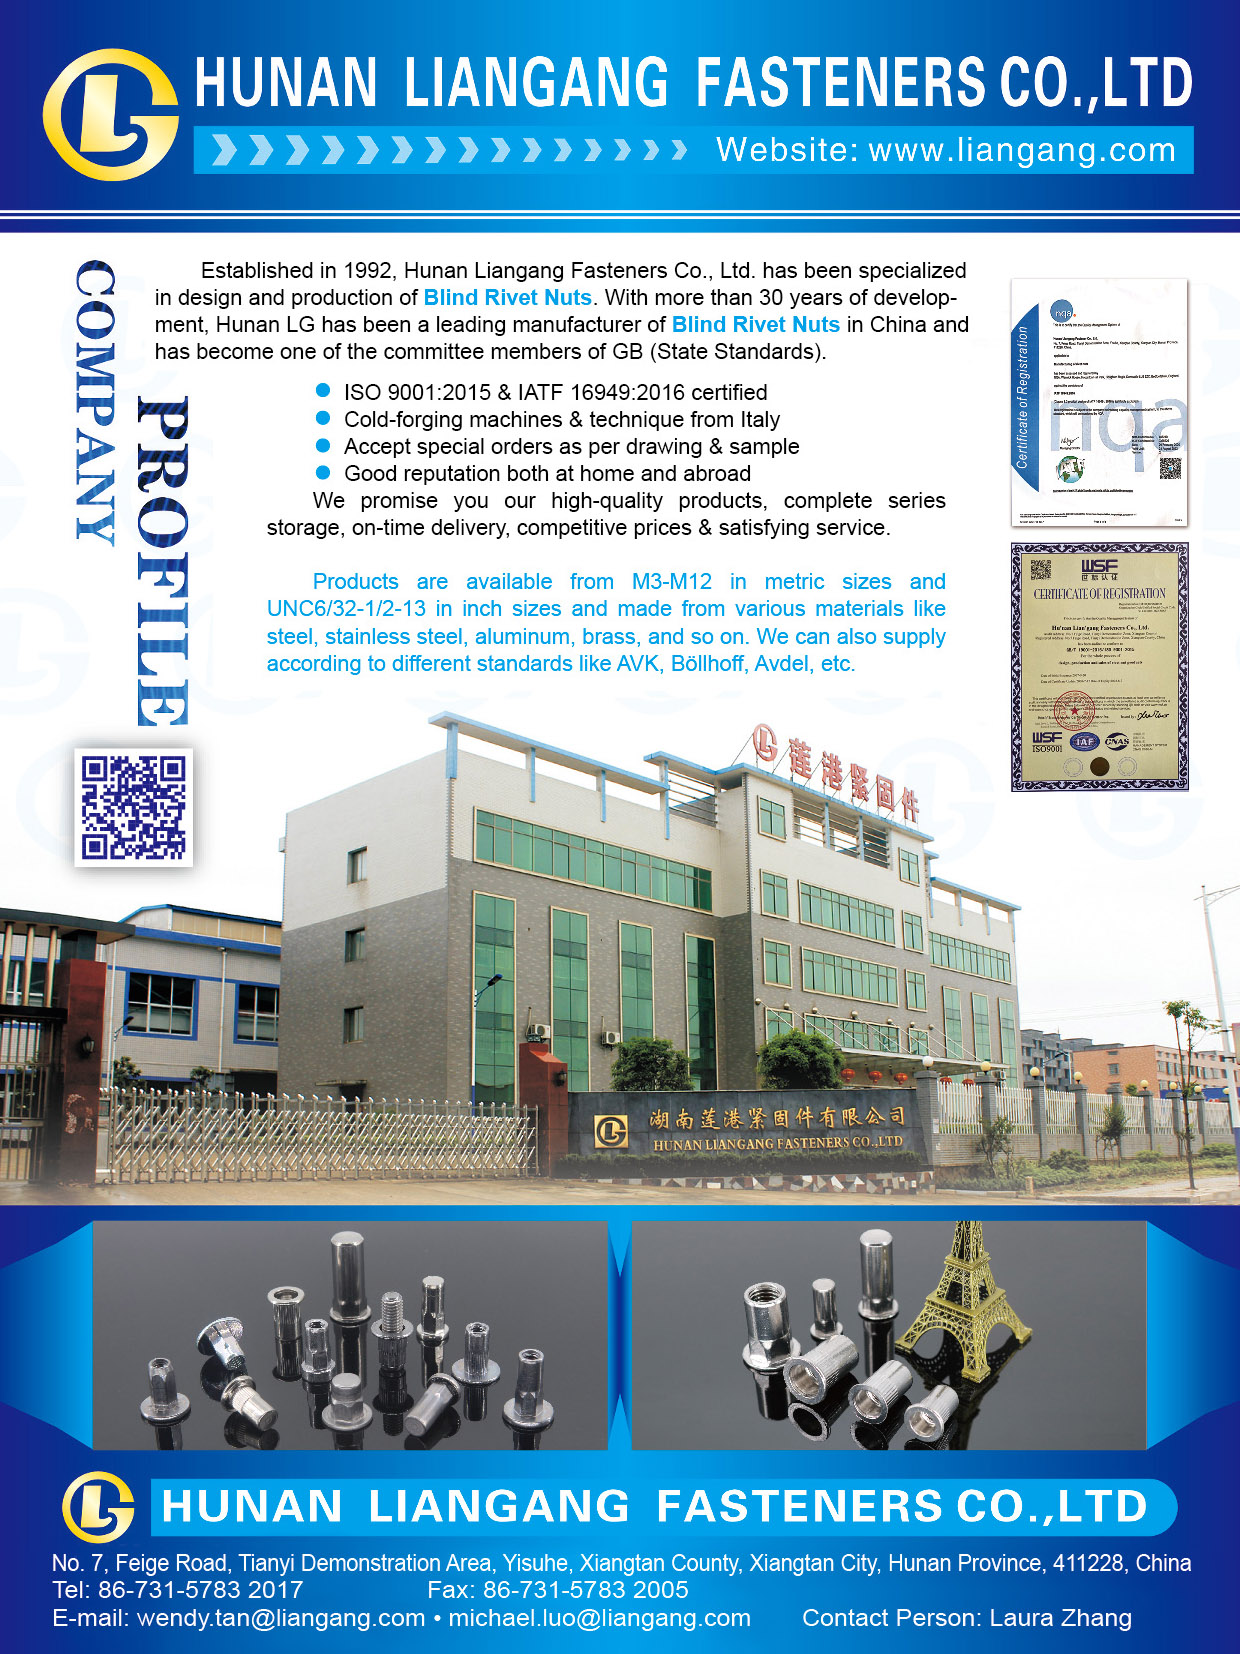 HUNAN LIANGANG FASTENERS CO., LTD. , Blind Rivet Nuts,Cold Forging Machines&technique from Italy,special order as per drawing&sample,